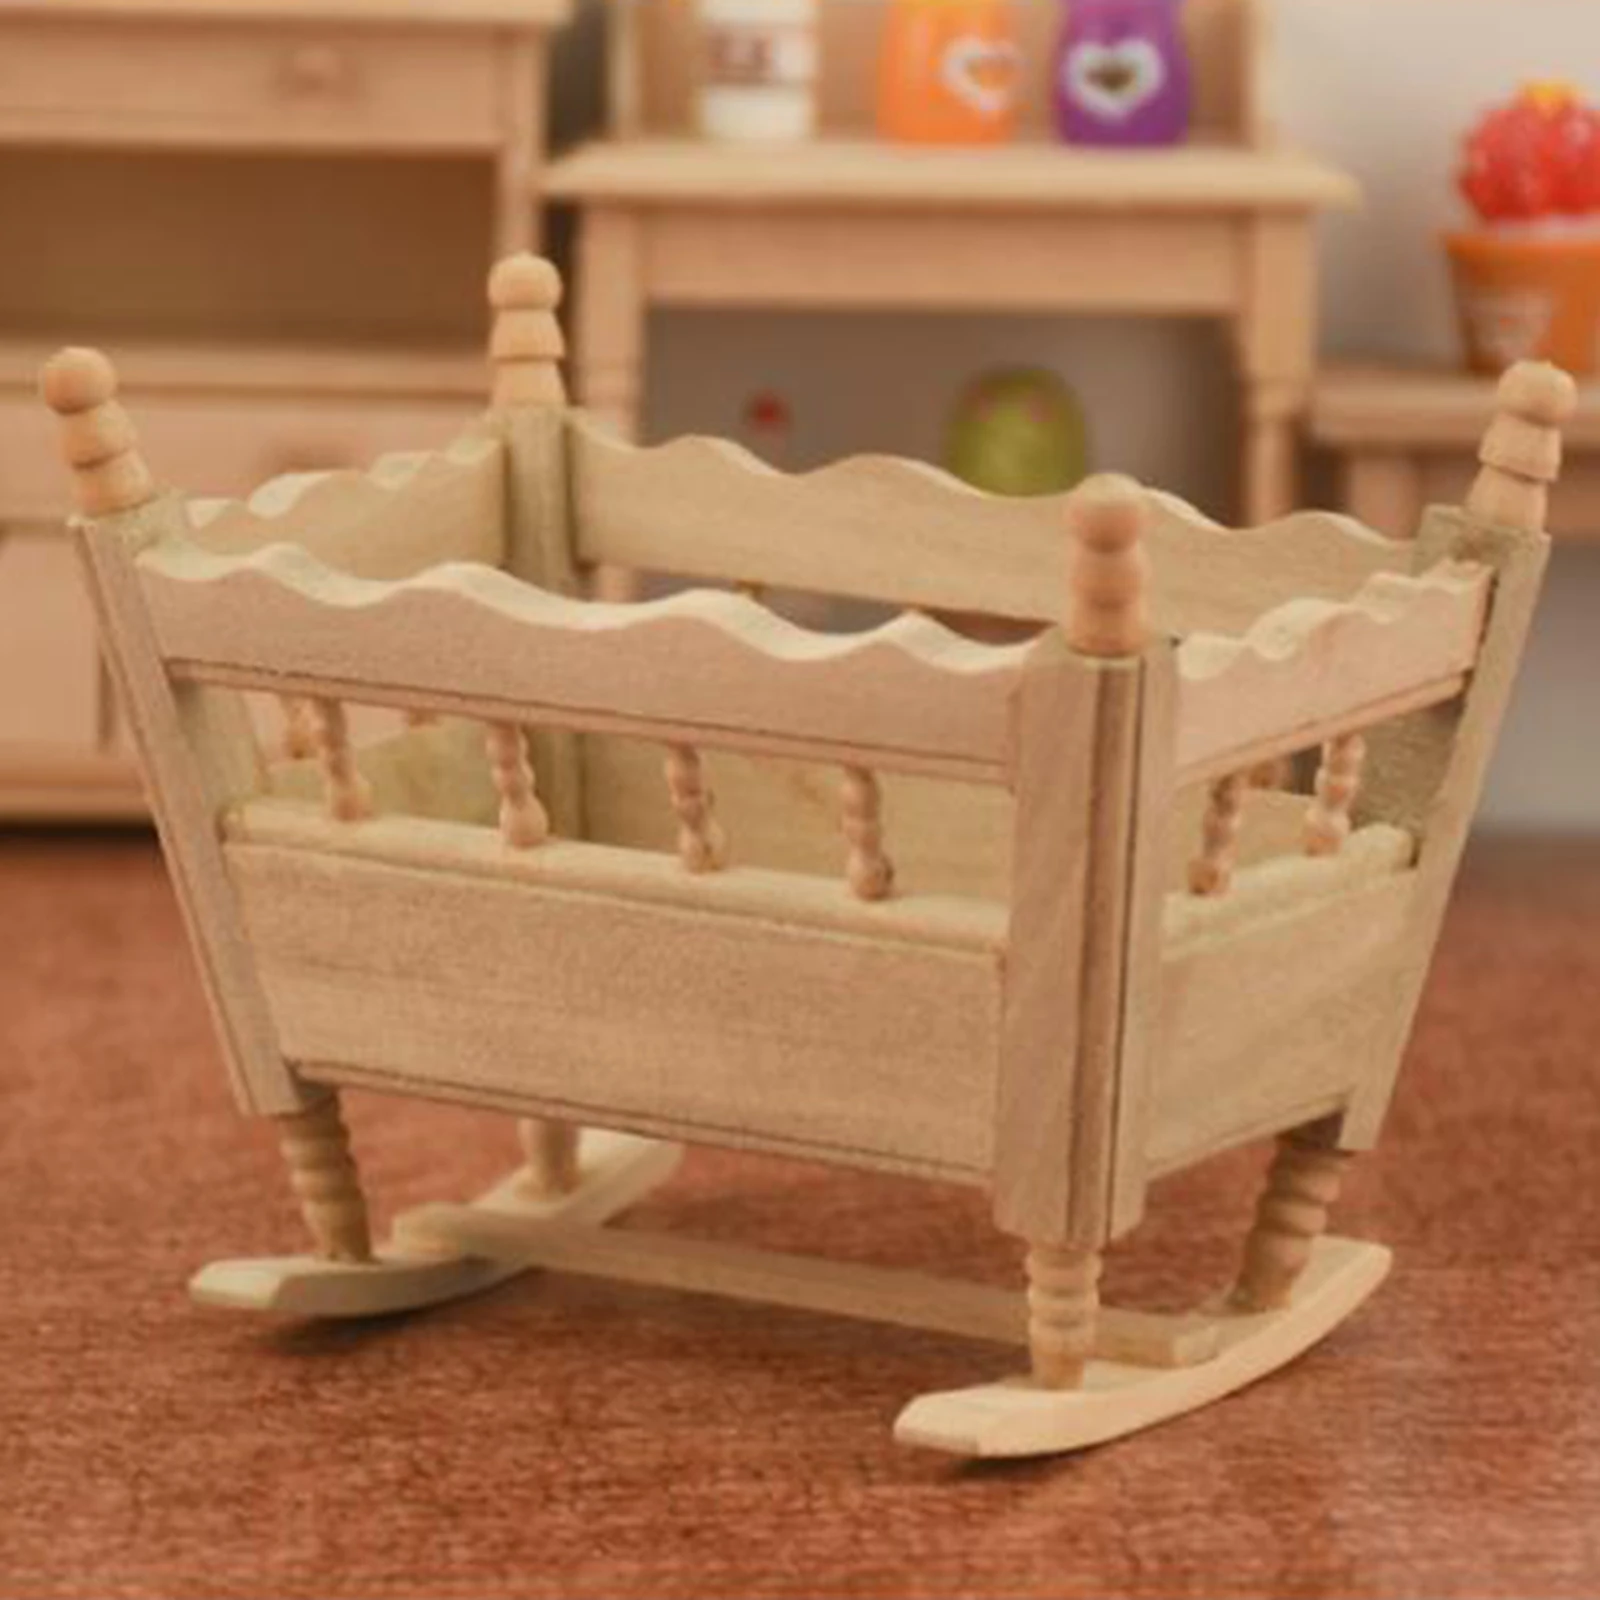 1:12 Scale Doll House Miniature Wooden Cradle Simulation Model Furniture